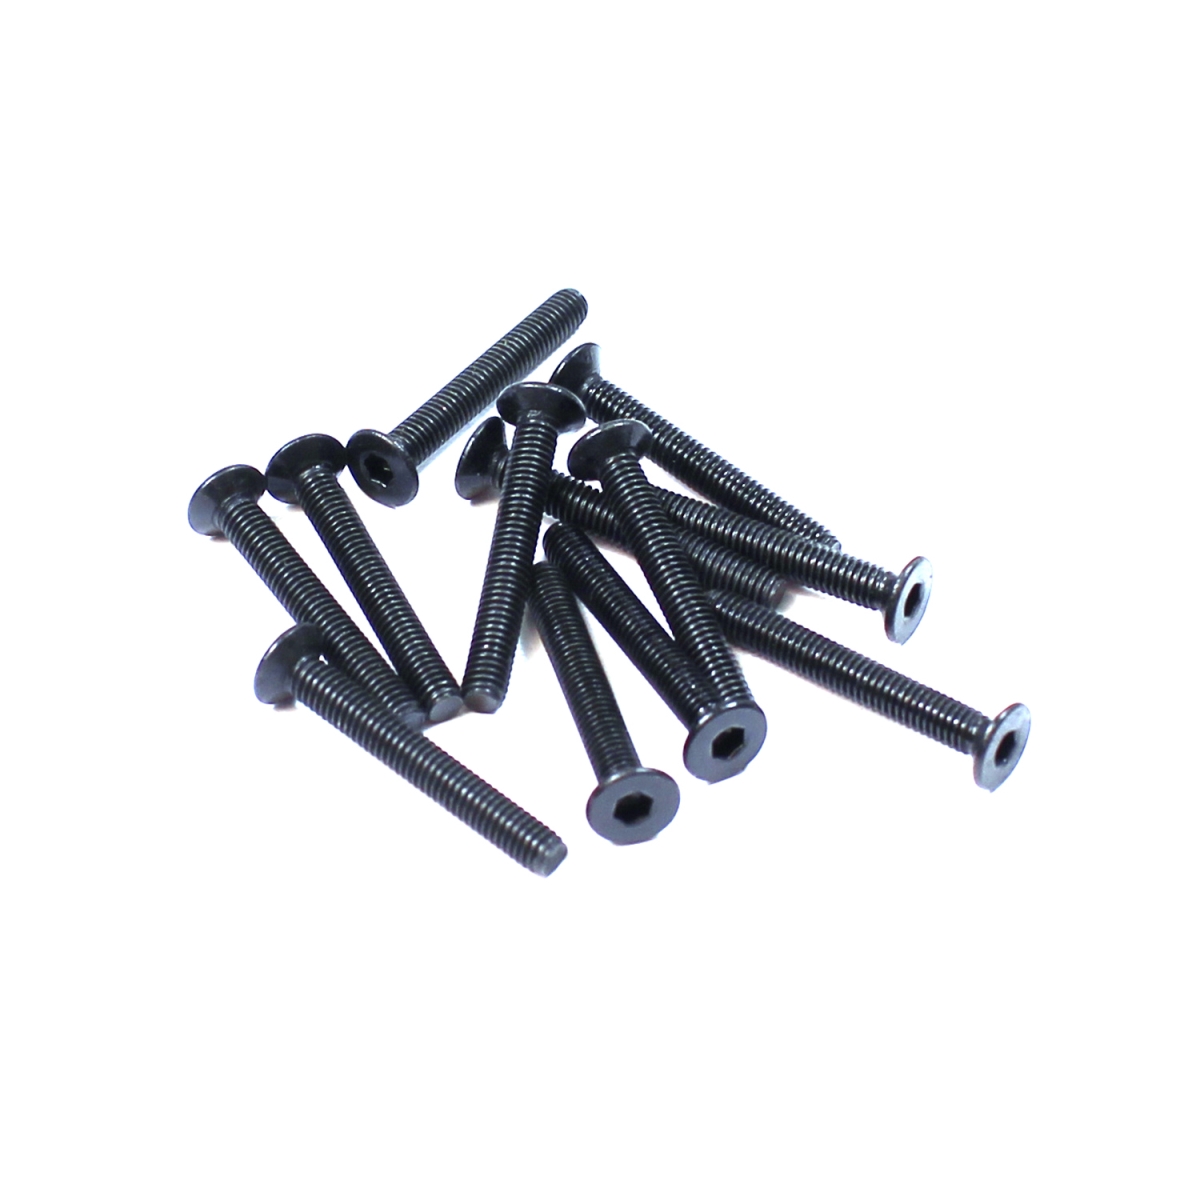 Rage Rc Rgrc6229 3 X 22 Mm Rzx Hex Countersunk Self Tapping Screws - 12 Piece